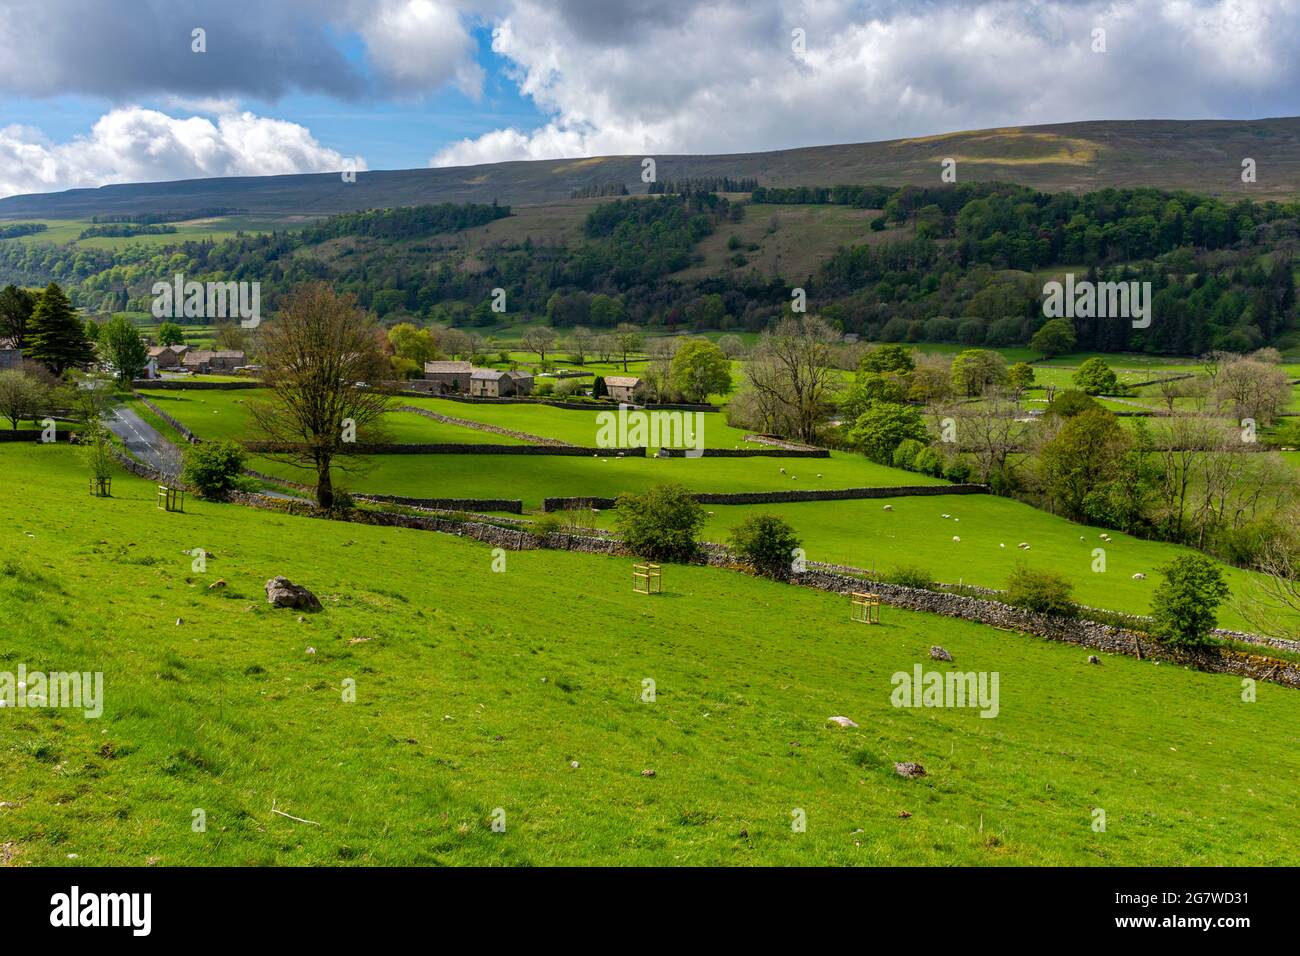 Buckden village and the ridge of Old Cote Moor Top, Upper Wharfedale, Yorkshire Dales National Park, Yorkshire, England, UK Stock Photo